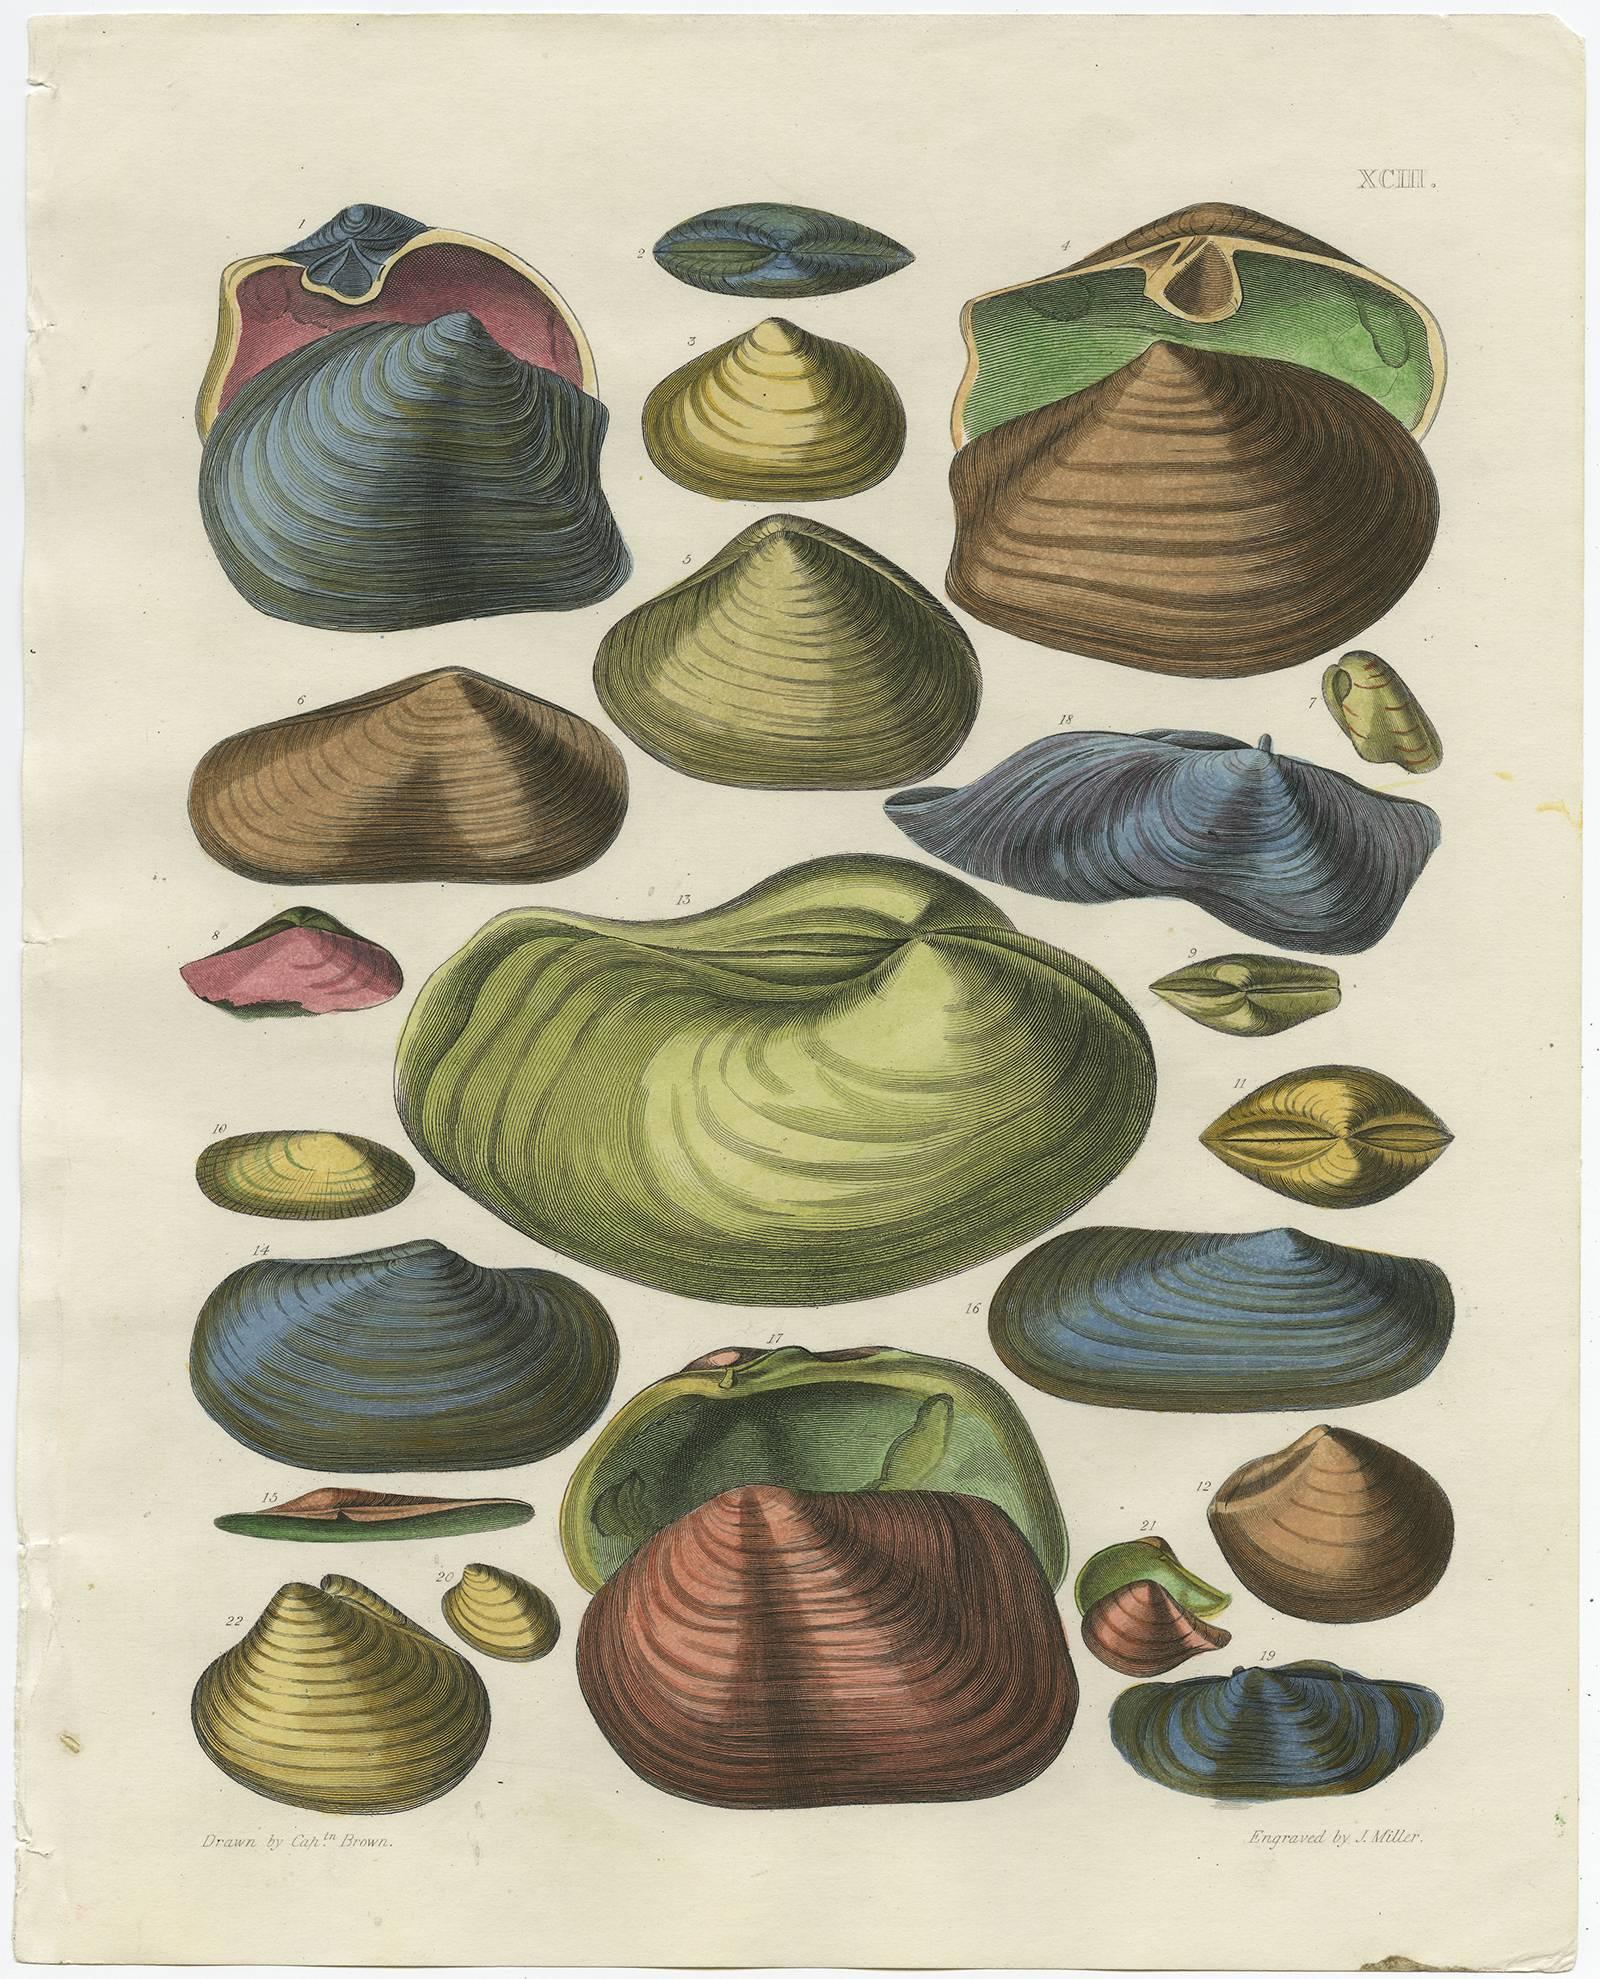 Original hand-colored engravings from illustrations of the 